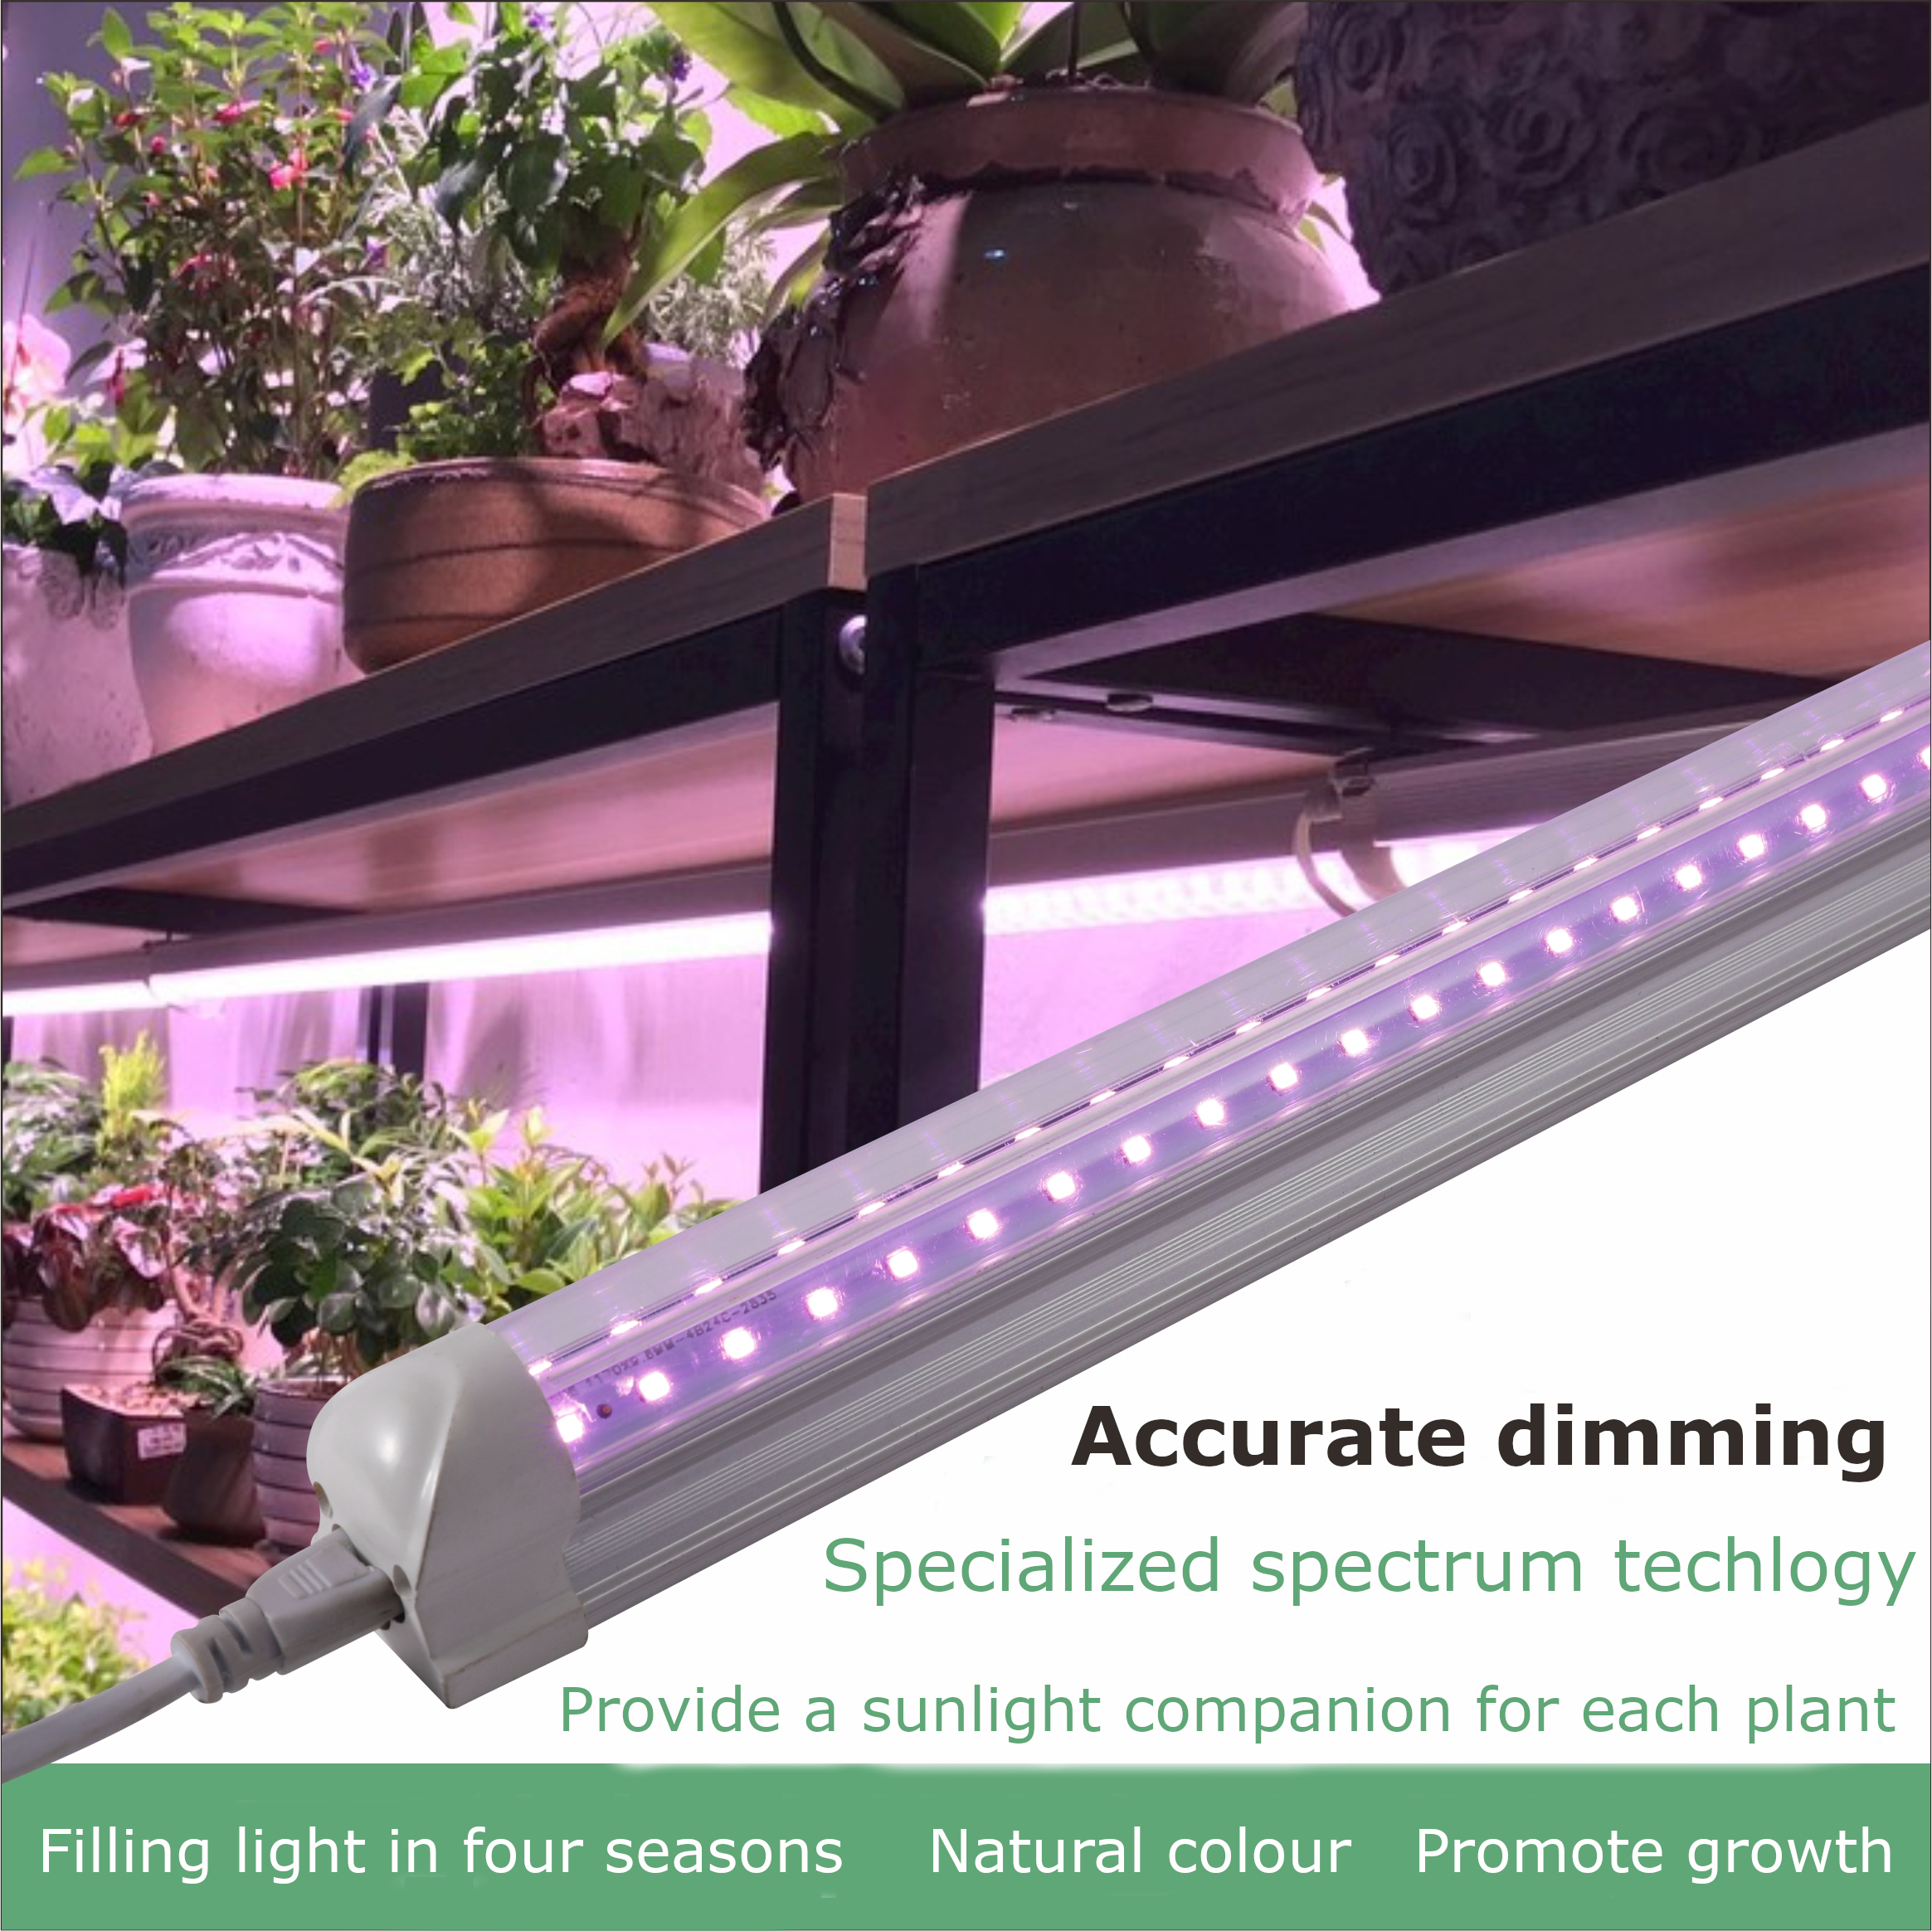 Led  plant grow tube light T8 600mm with New Diodes & IR Lights Full Spectrum Veg Bloom Growing Lamps for Indoor Plants Seeding Flower Led Plant Light Fixture